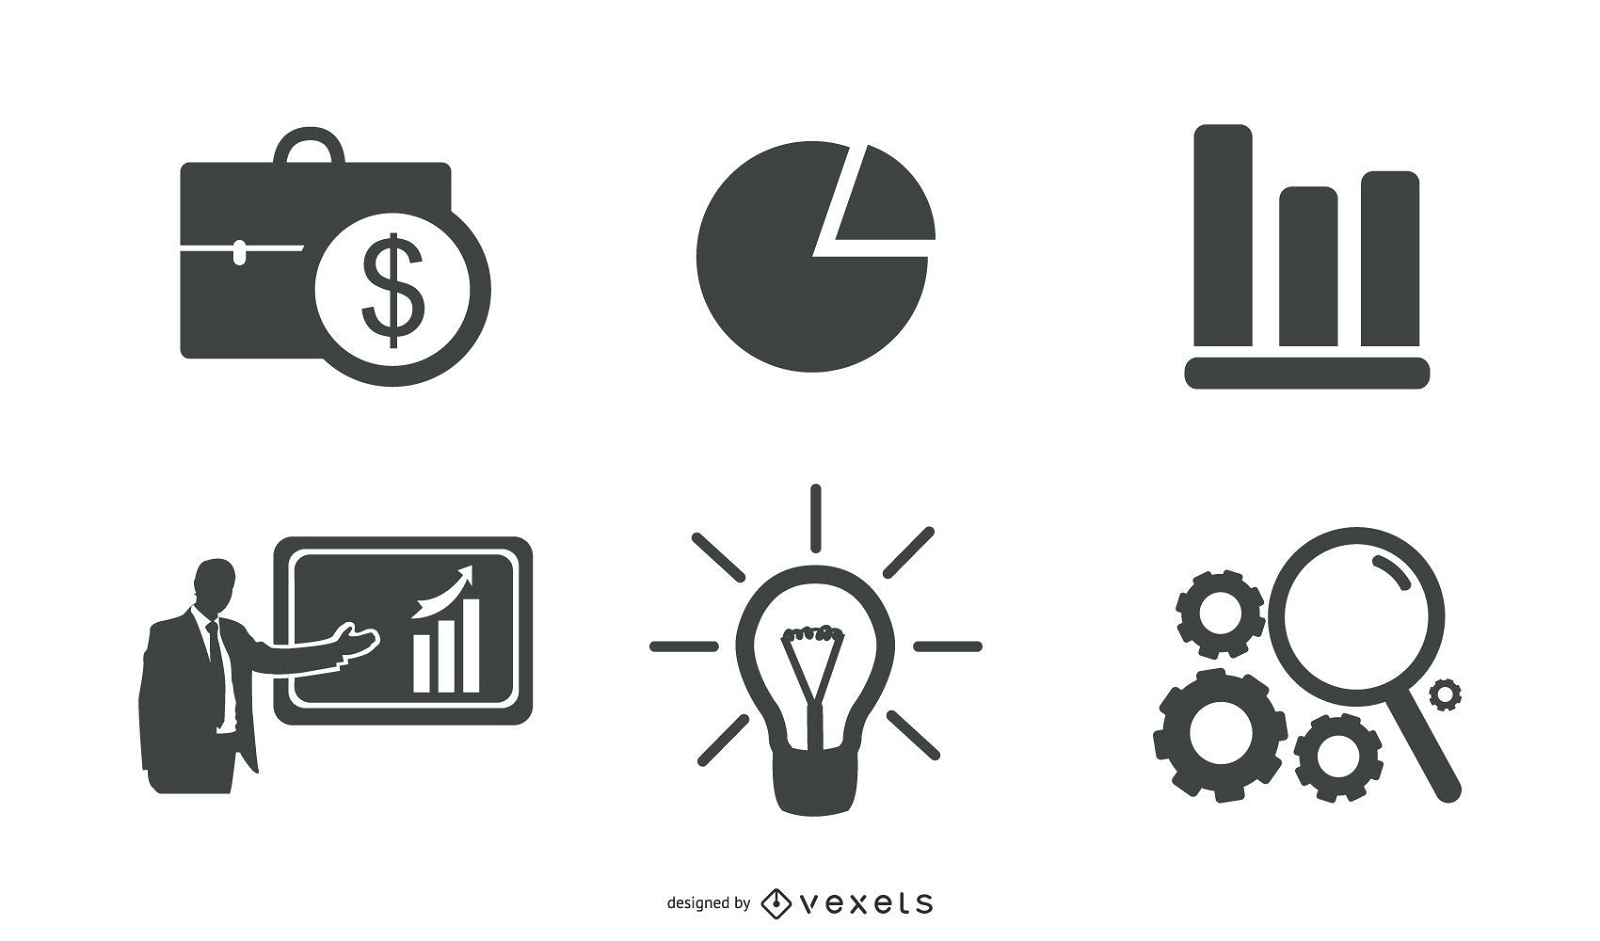 business icons black and white